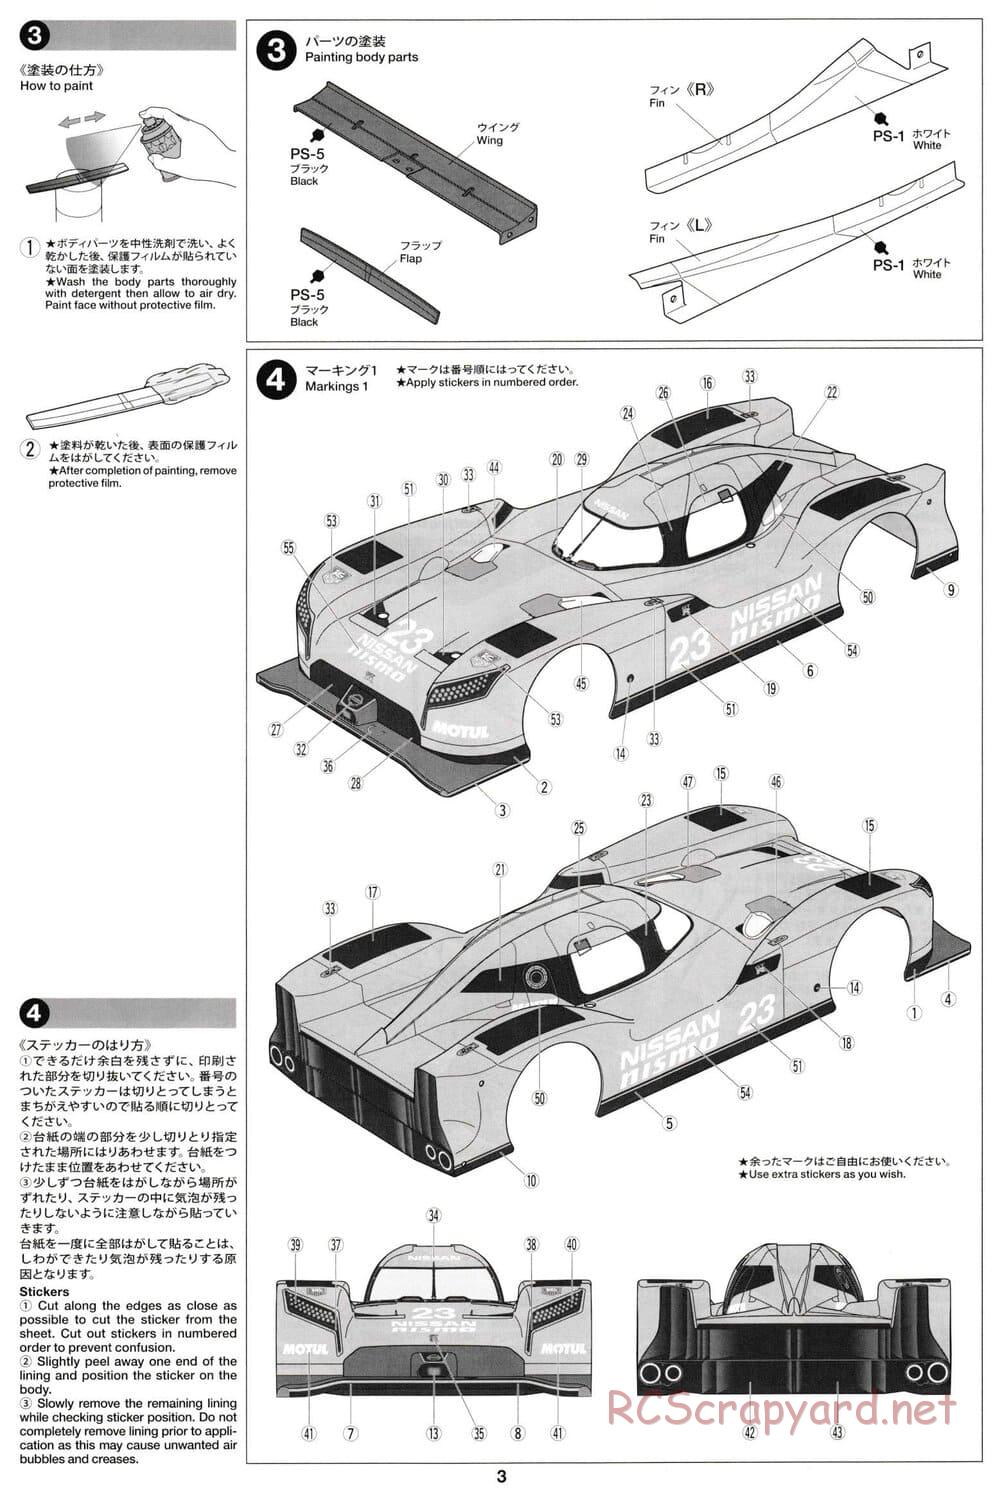 Tamiya - Nissan GT-R LM Nismo Launch Version - F103GT Chassis - Body Manual - Page 3